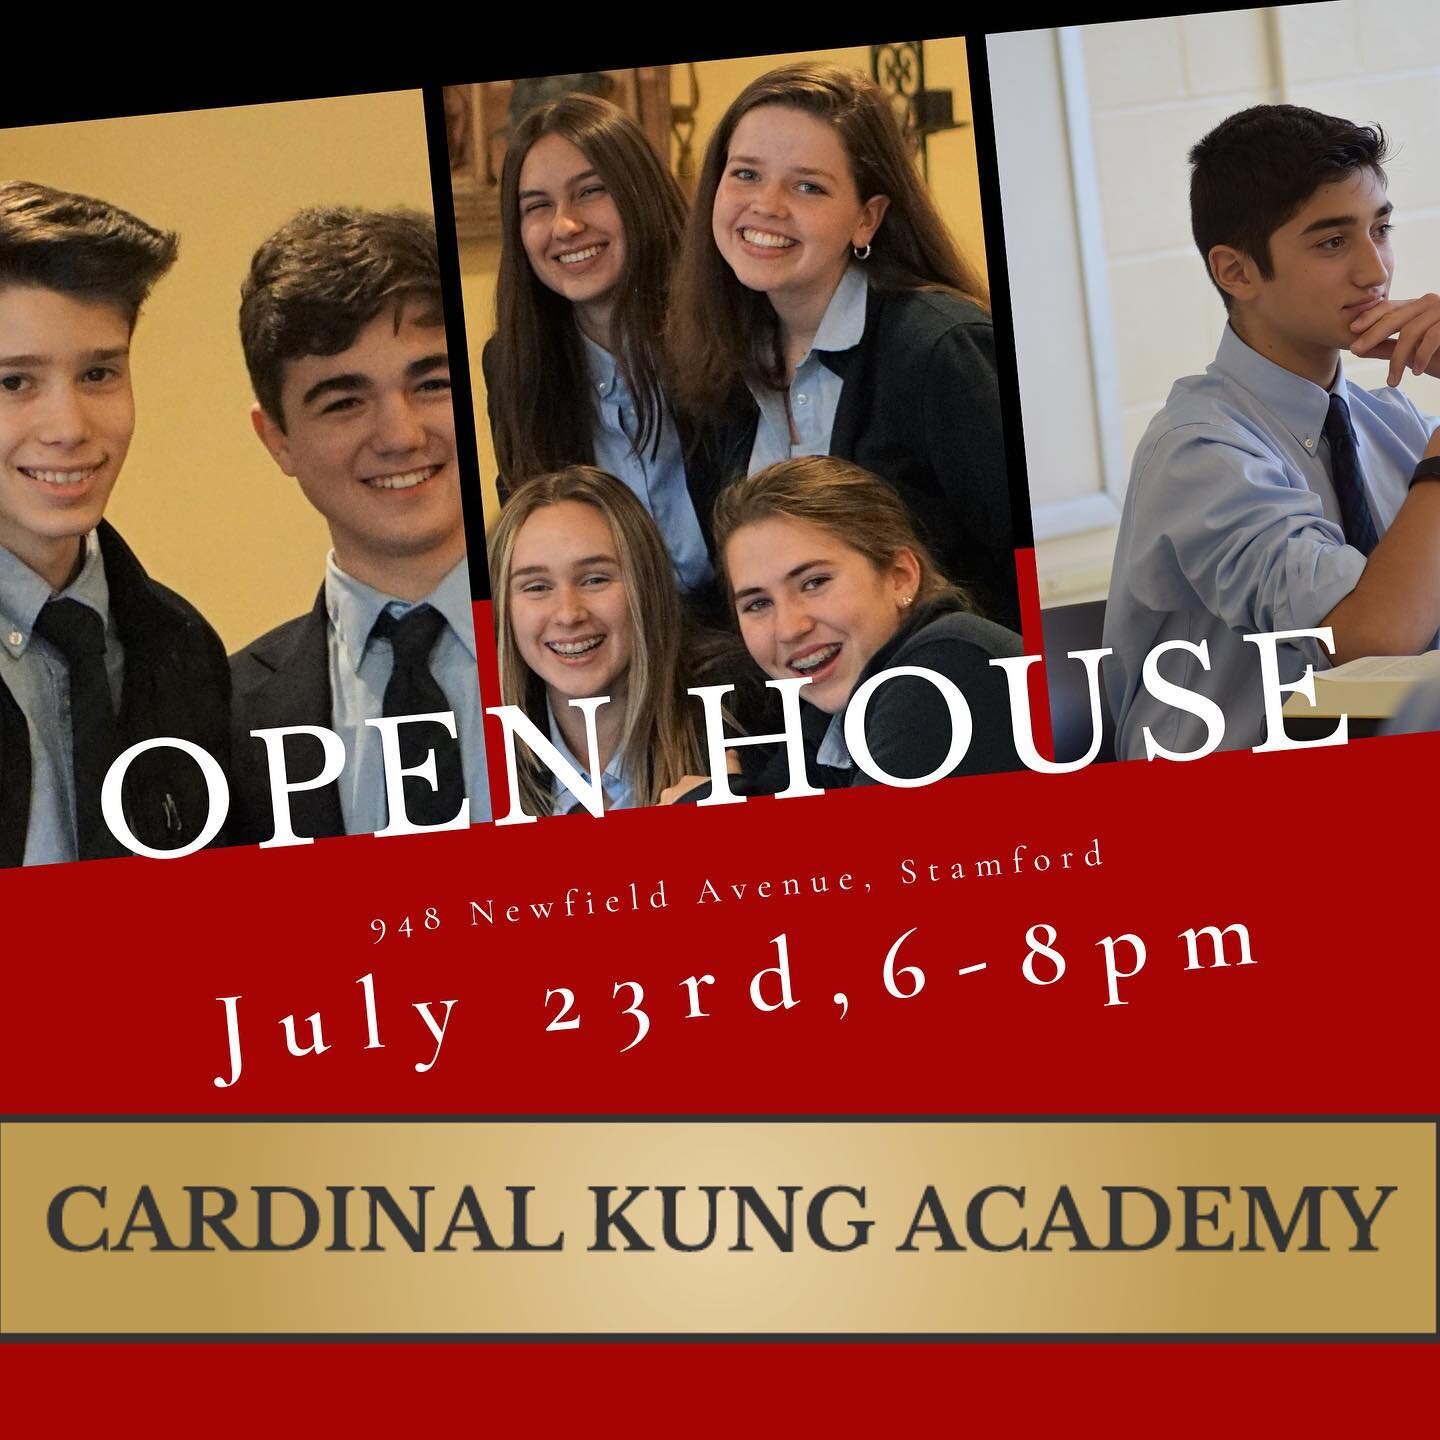 Come join us on the 23rd and meet the fantastic faculty and community at Cardinal Kung Academy. Come discover the classical education at CKA!